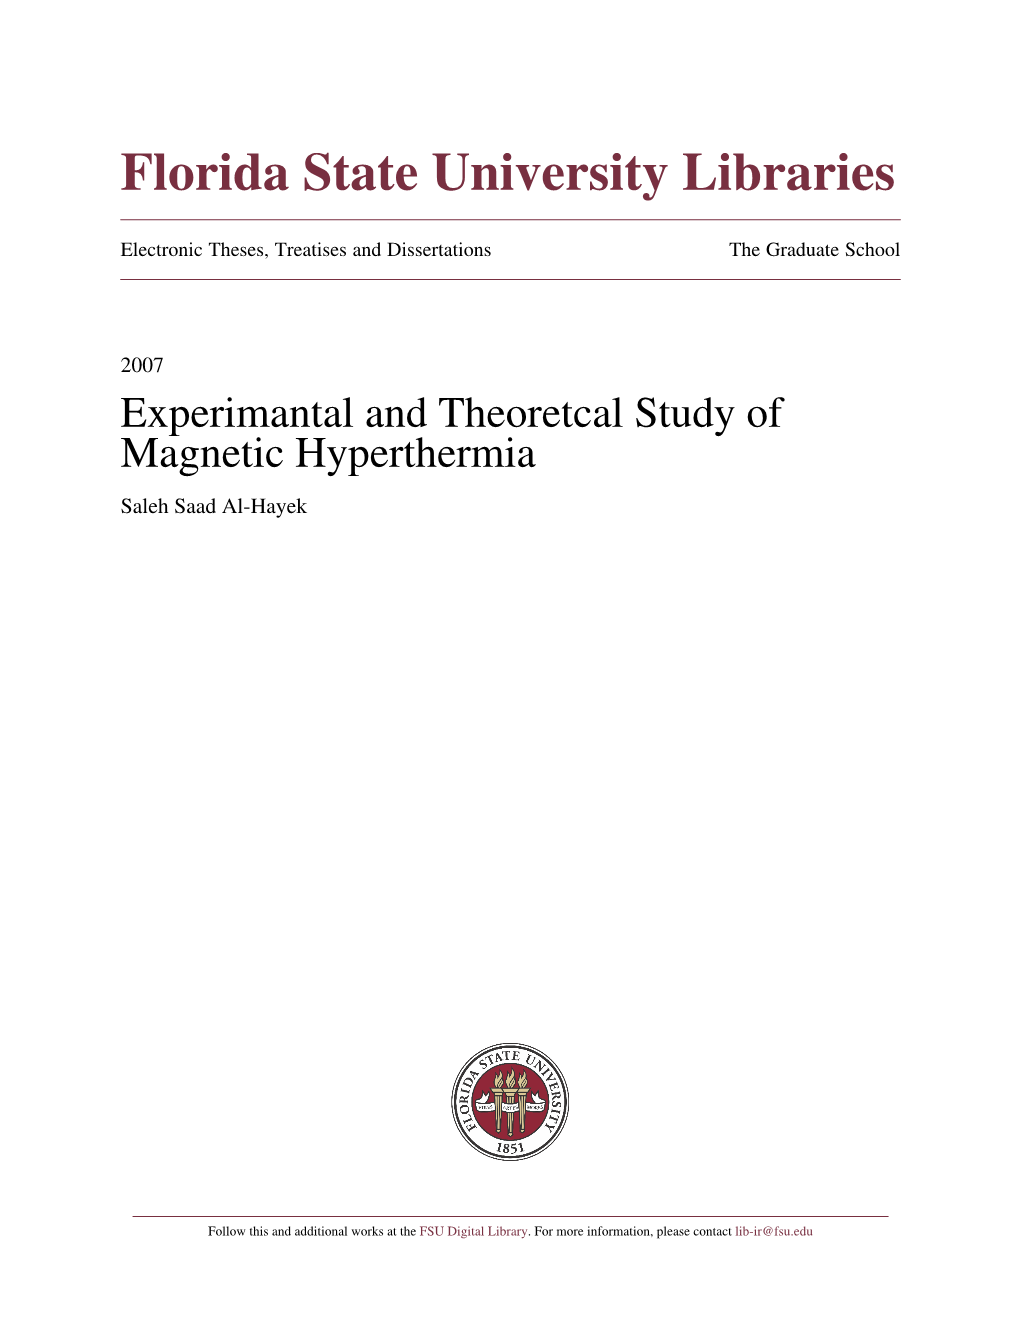 Experimantal and Theoretical Study of Magnetic Hyperthermia